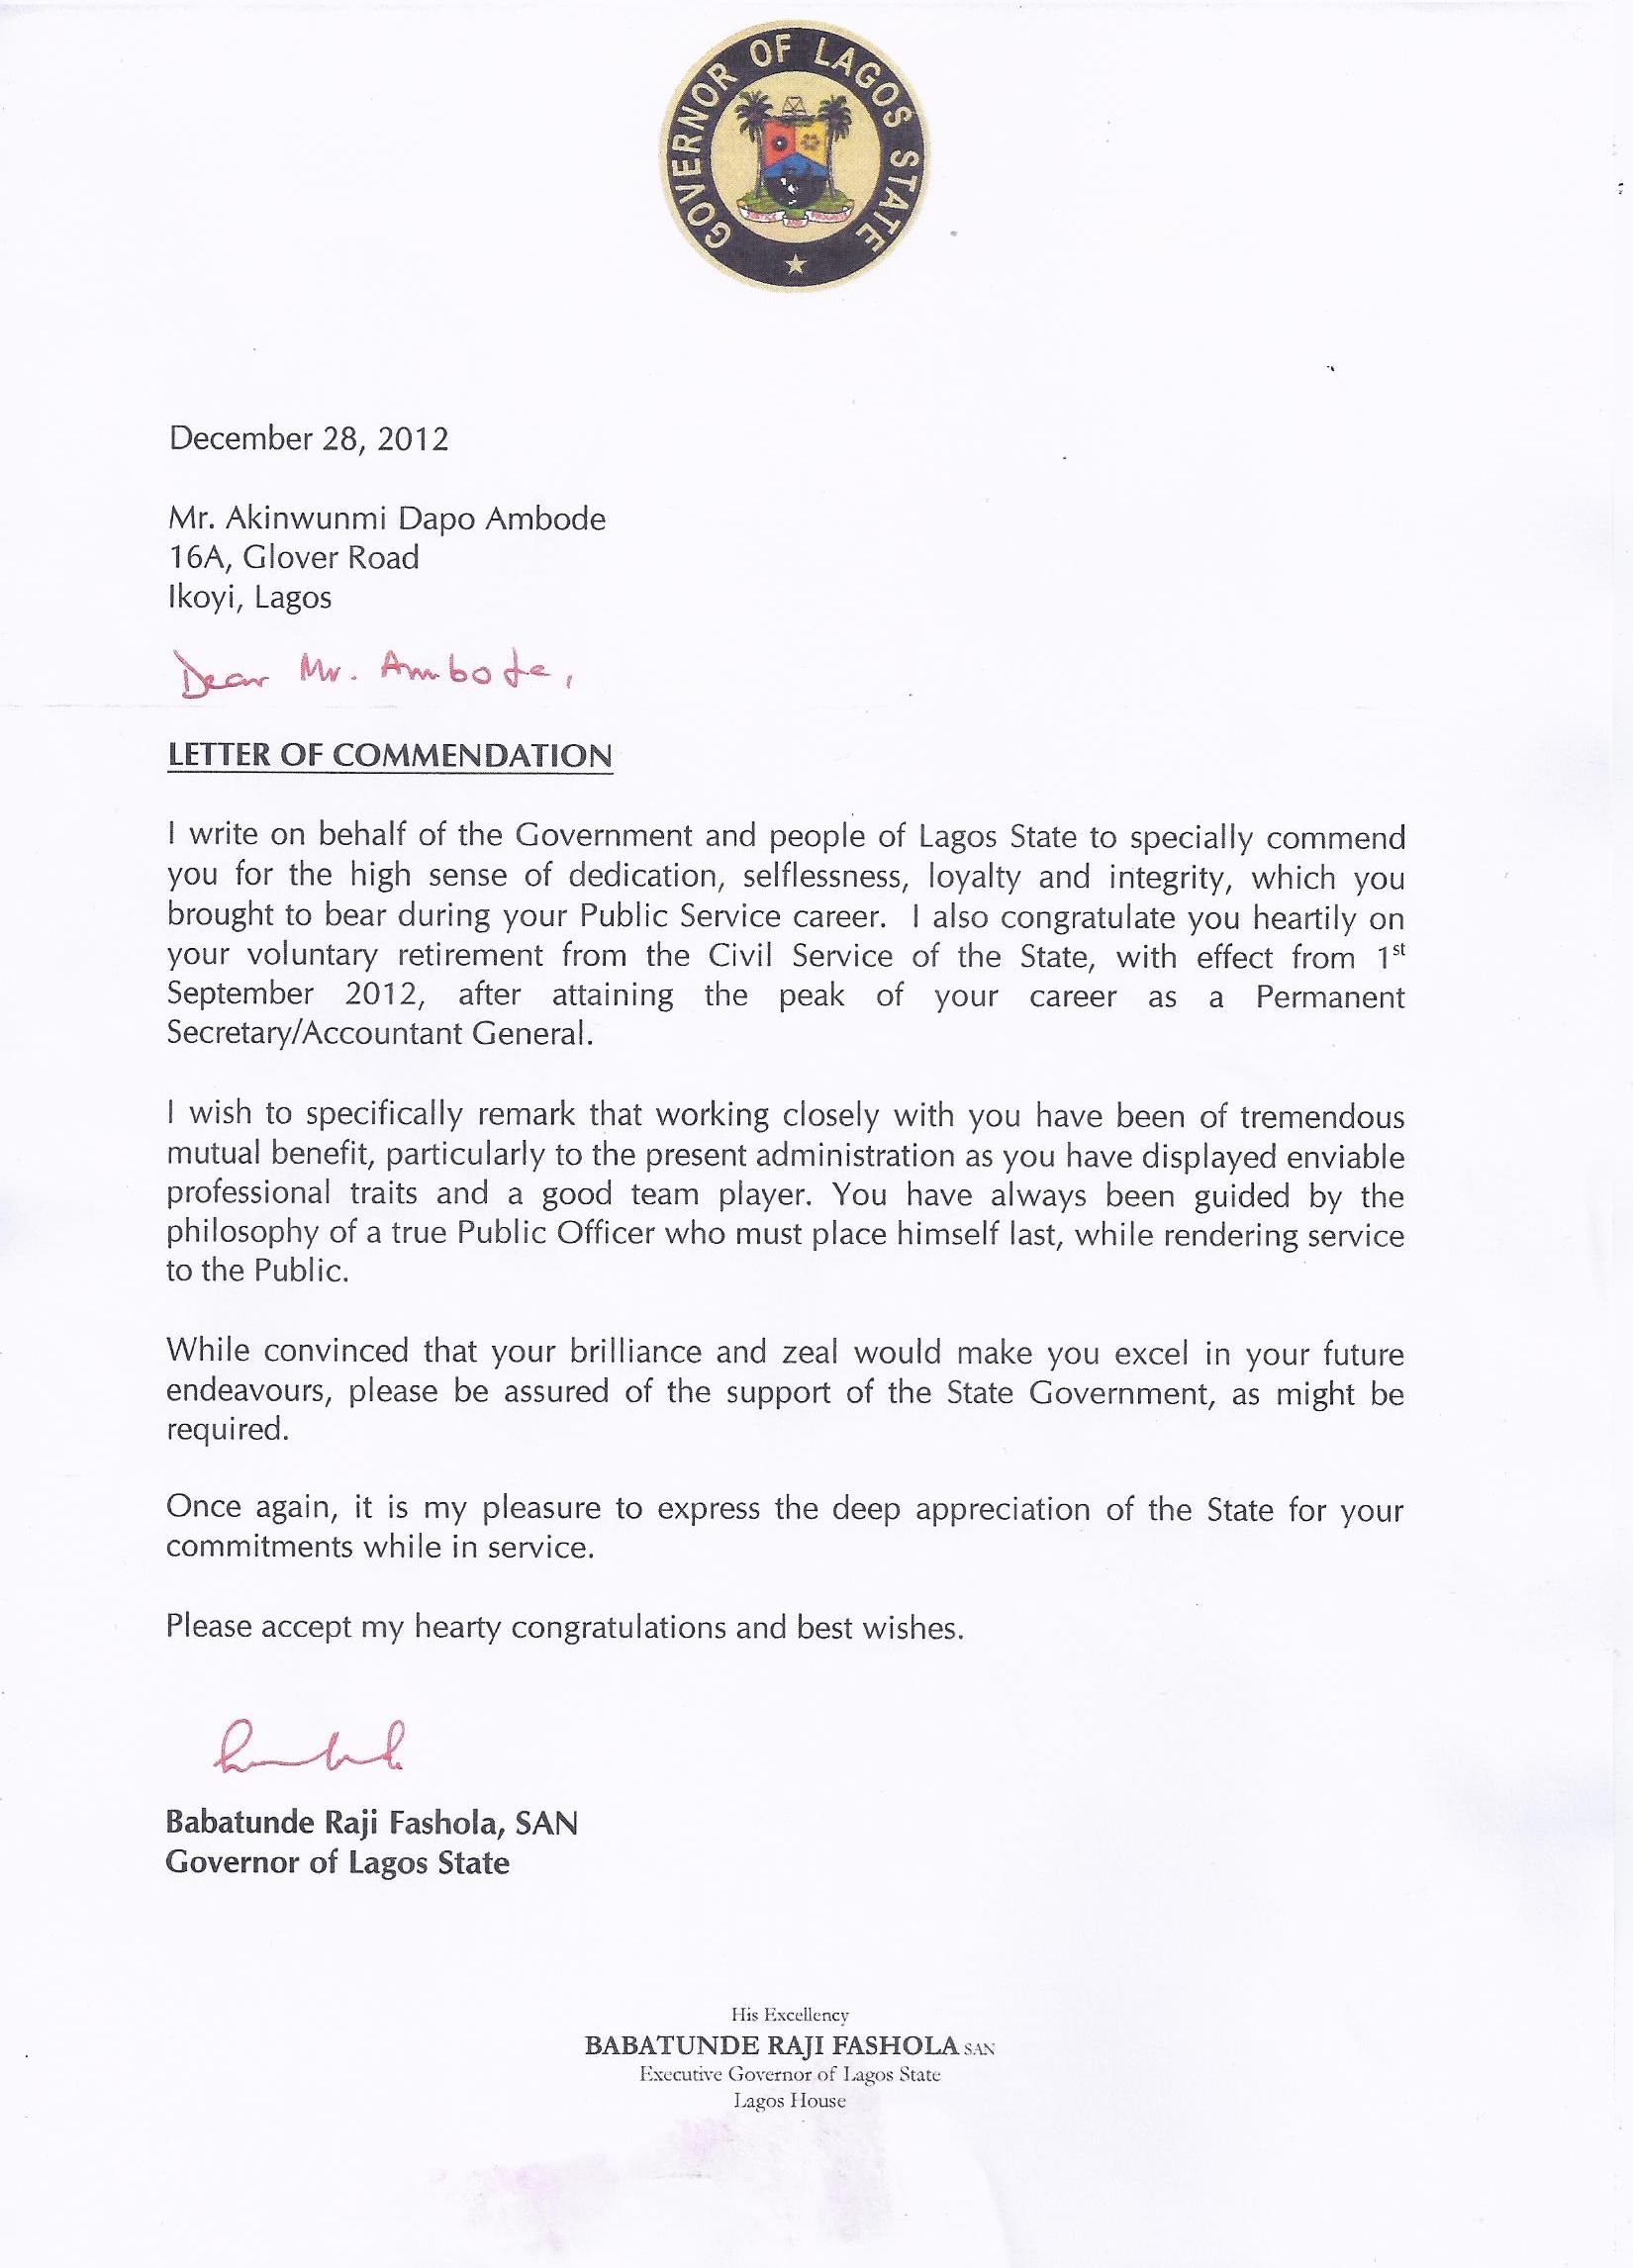 The Letter of Commendation Given to Akinwunmi Ambode Upon His Retirement in 2012